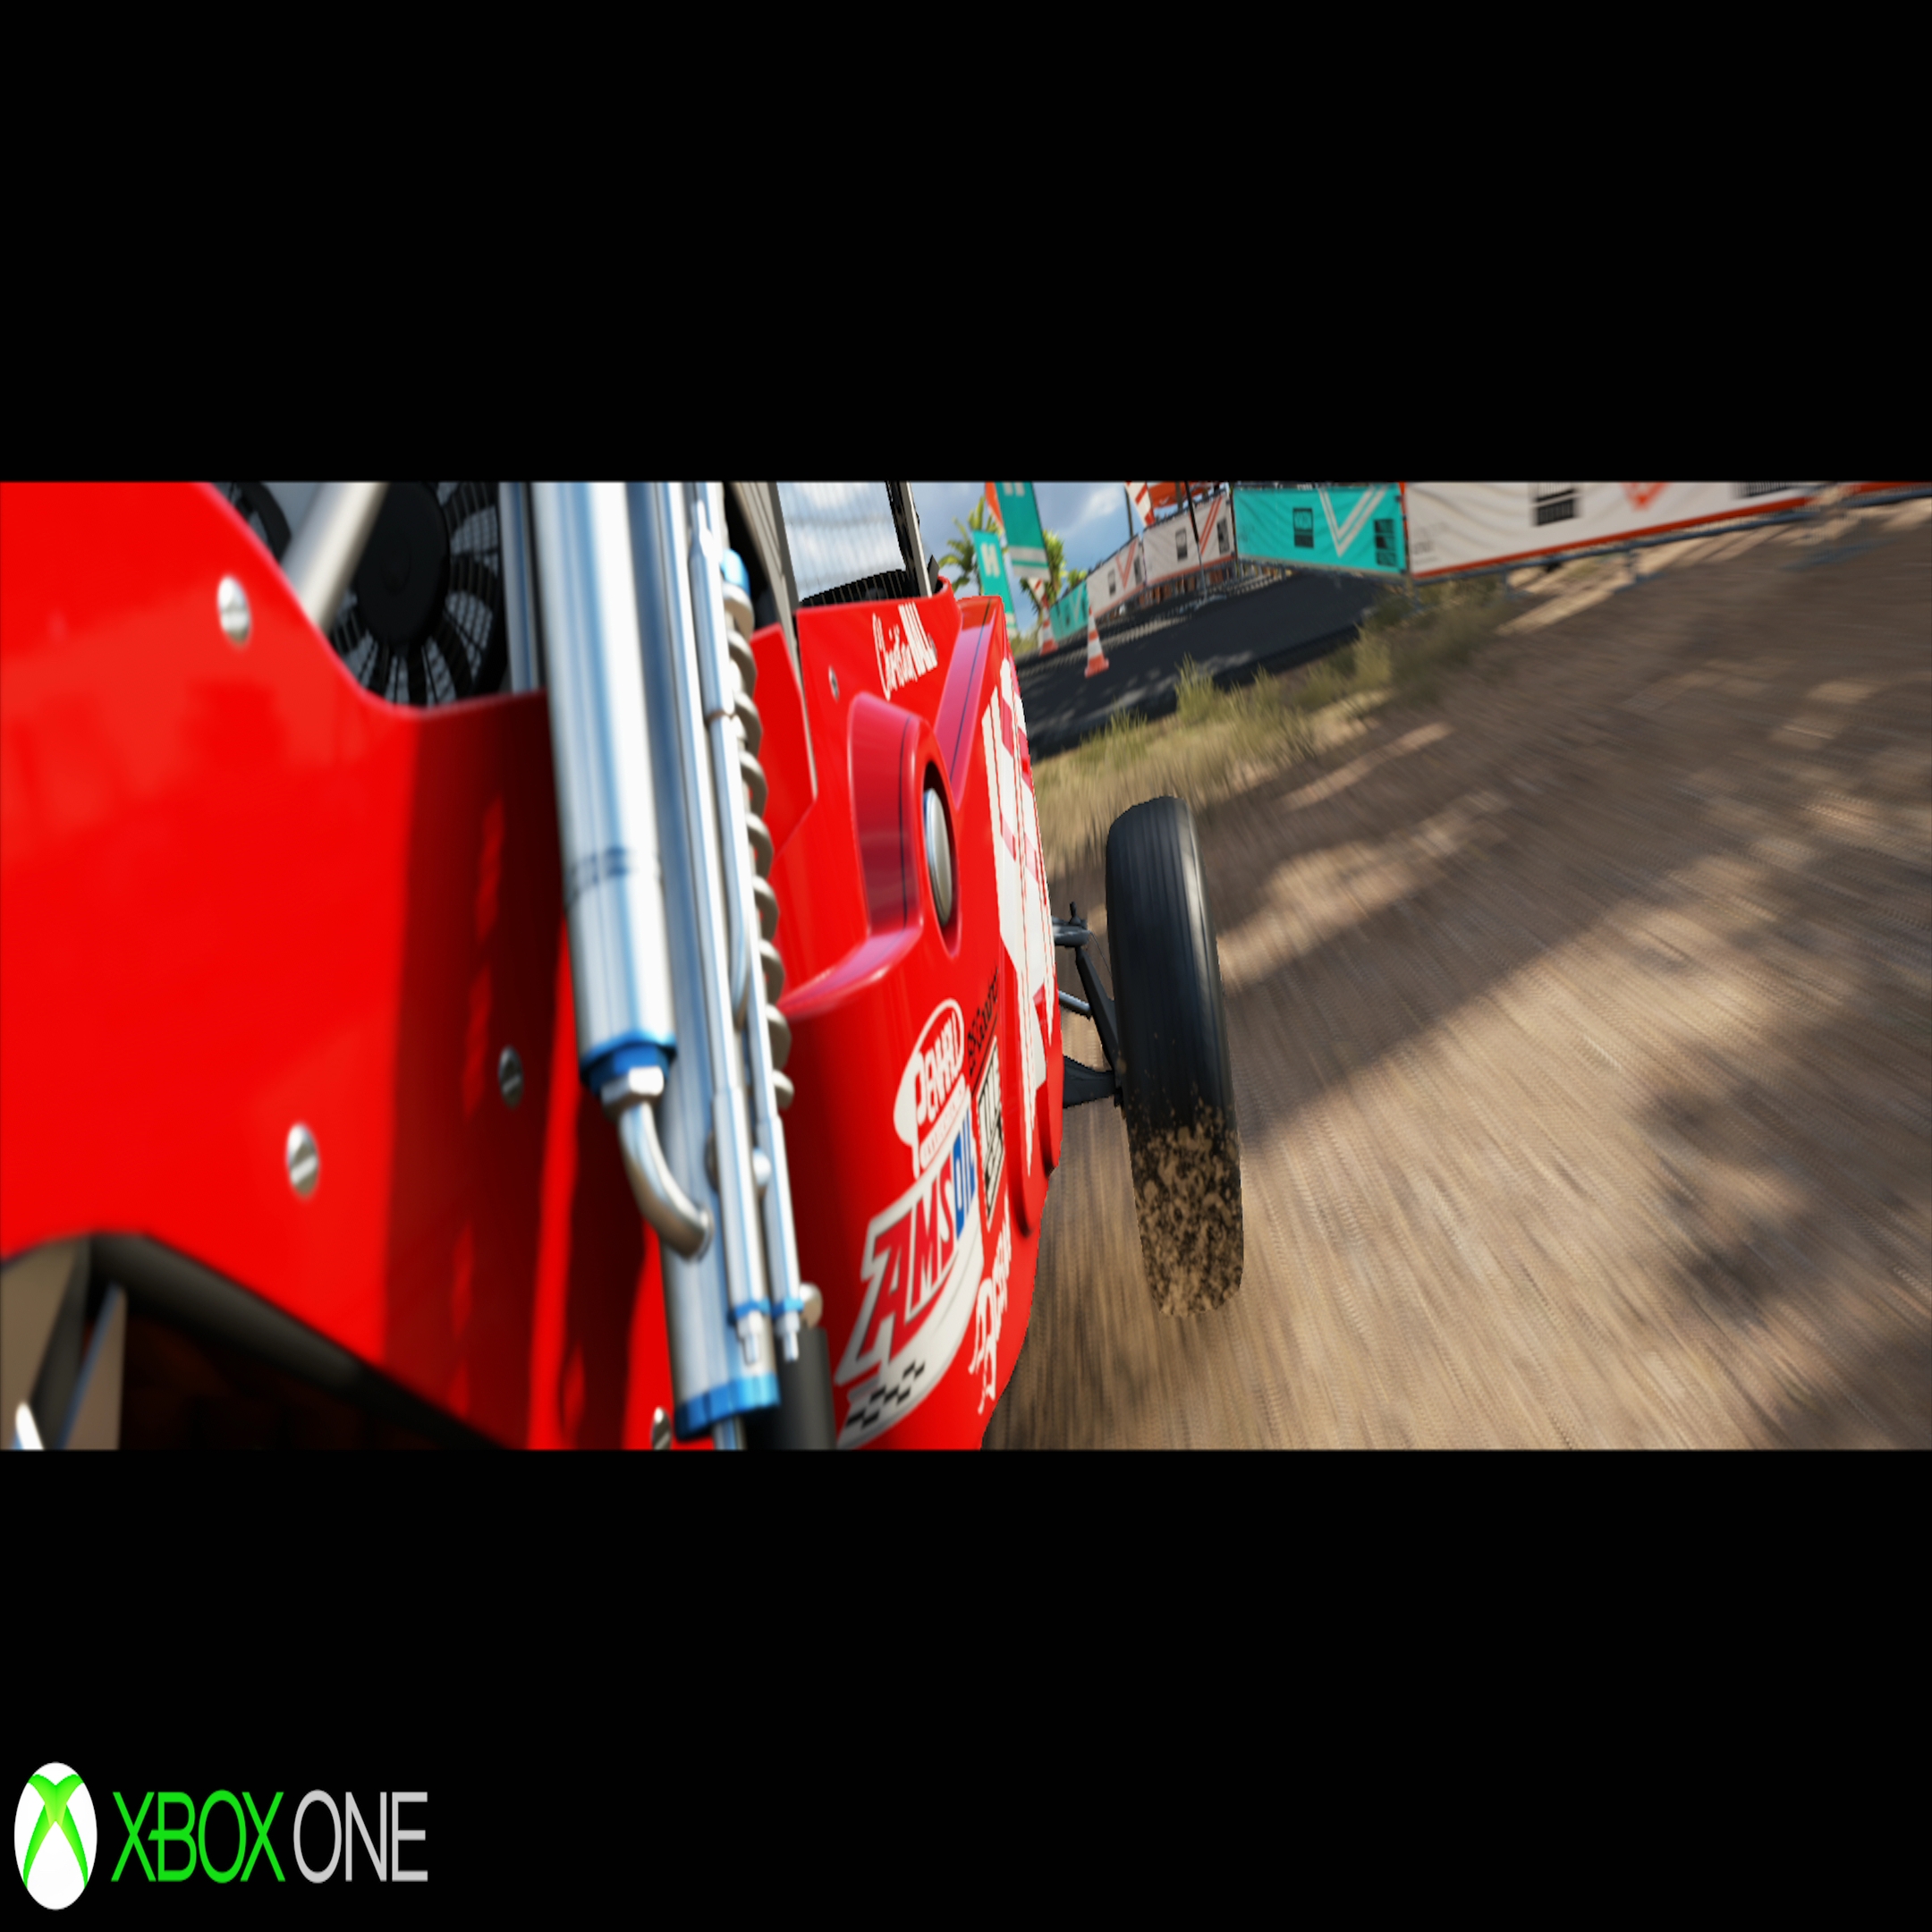 Forza Horizon 3 to Receive Native 4K Patch on Xbox One X Today - Operation  Sports